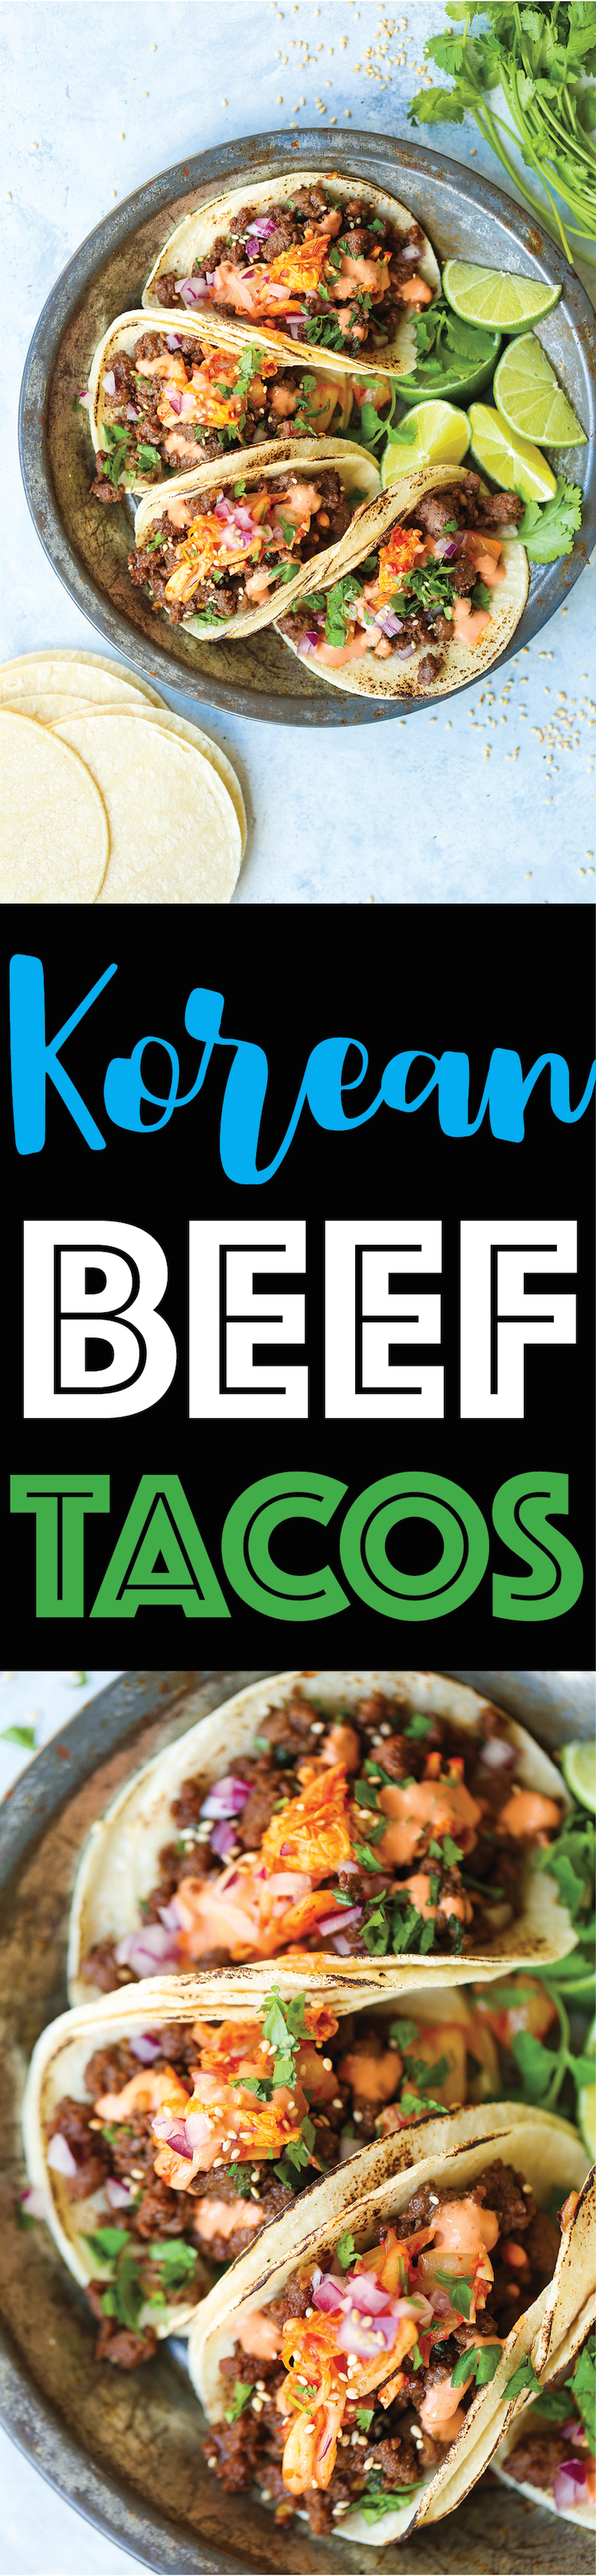 Korean Beef Tacos - Whoa. Guys. These are the most mind-blowing tacos EVER! Filled with everyone's favorite Korean beef, caramelized kimchi + Sriracha mayo!